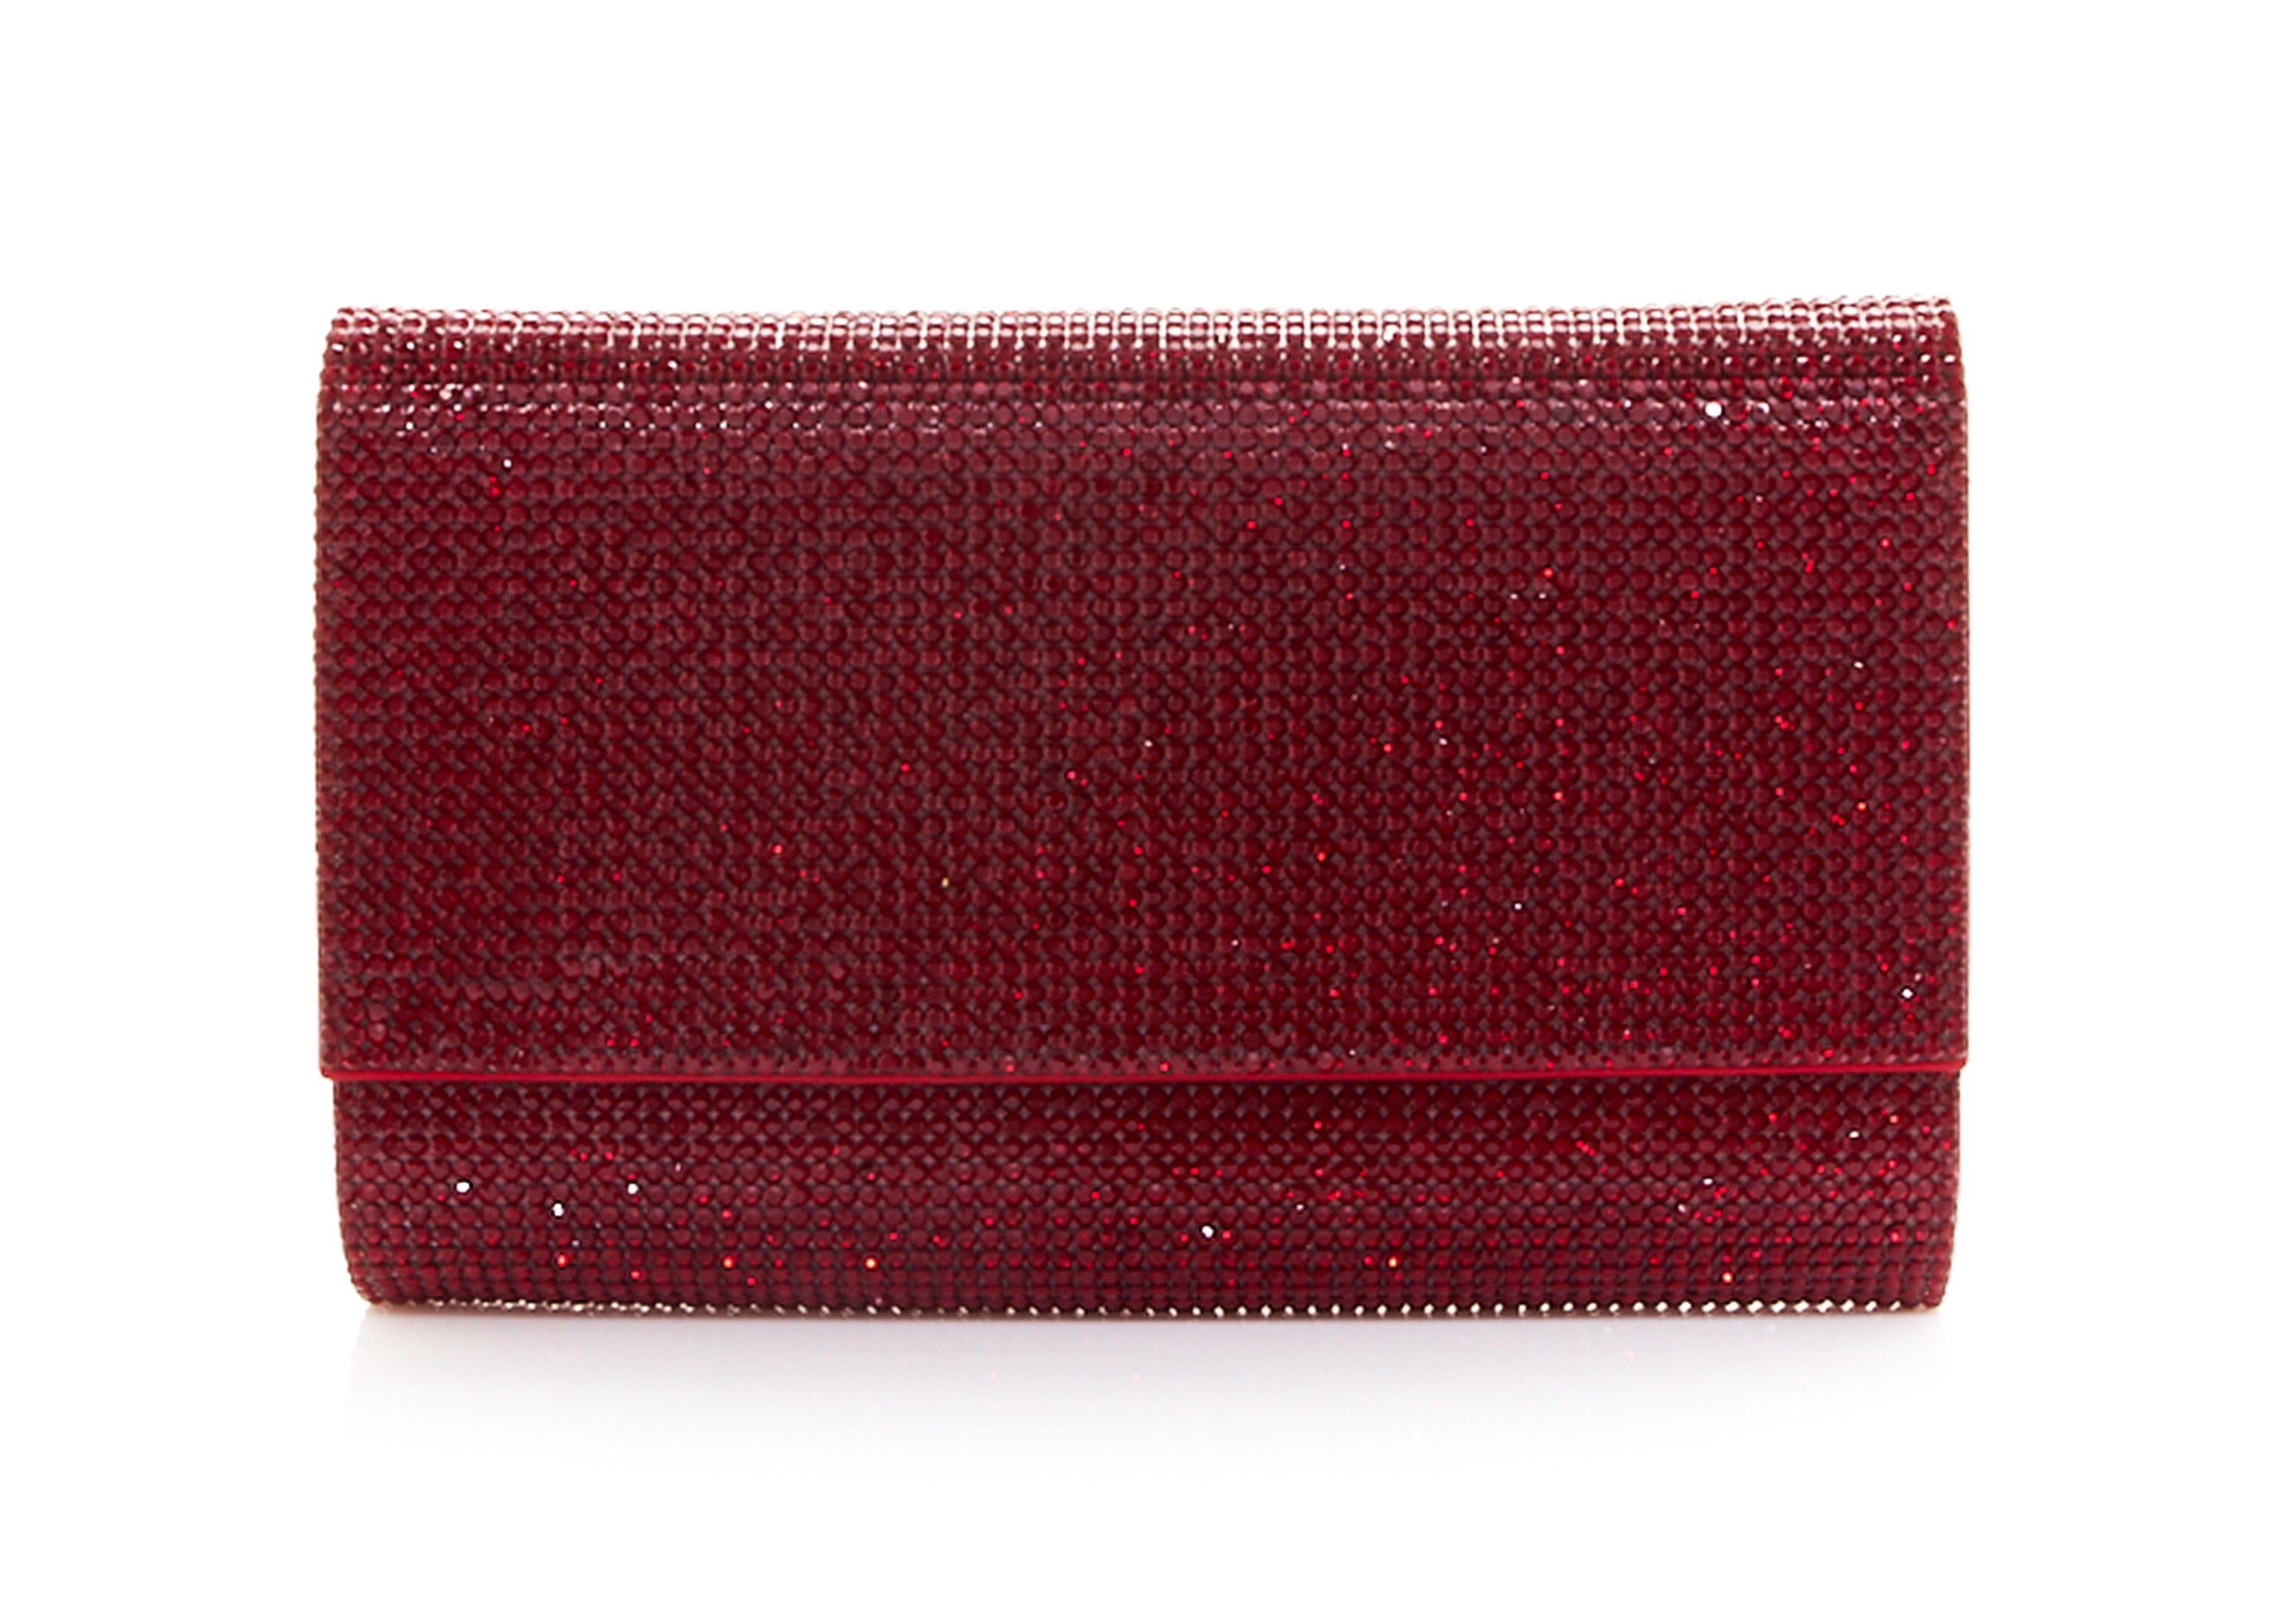 Judith Leiber Fresh Hot French Fries Crystal Minaudiere Clutch Bag Red Pattern